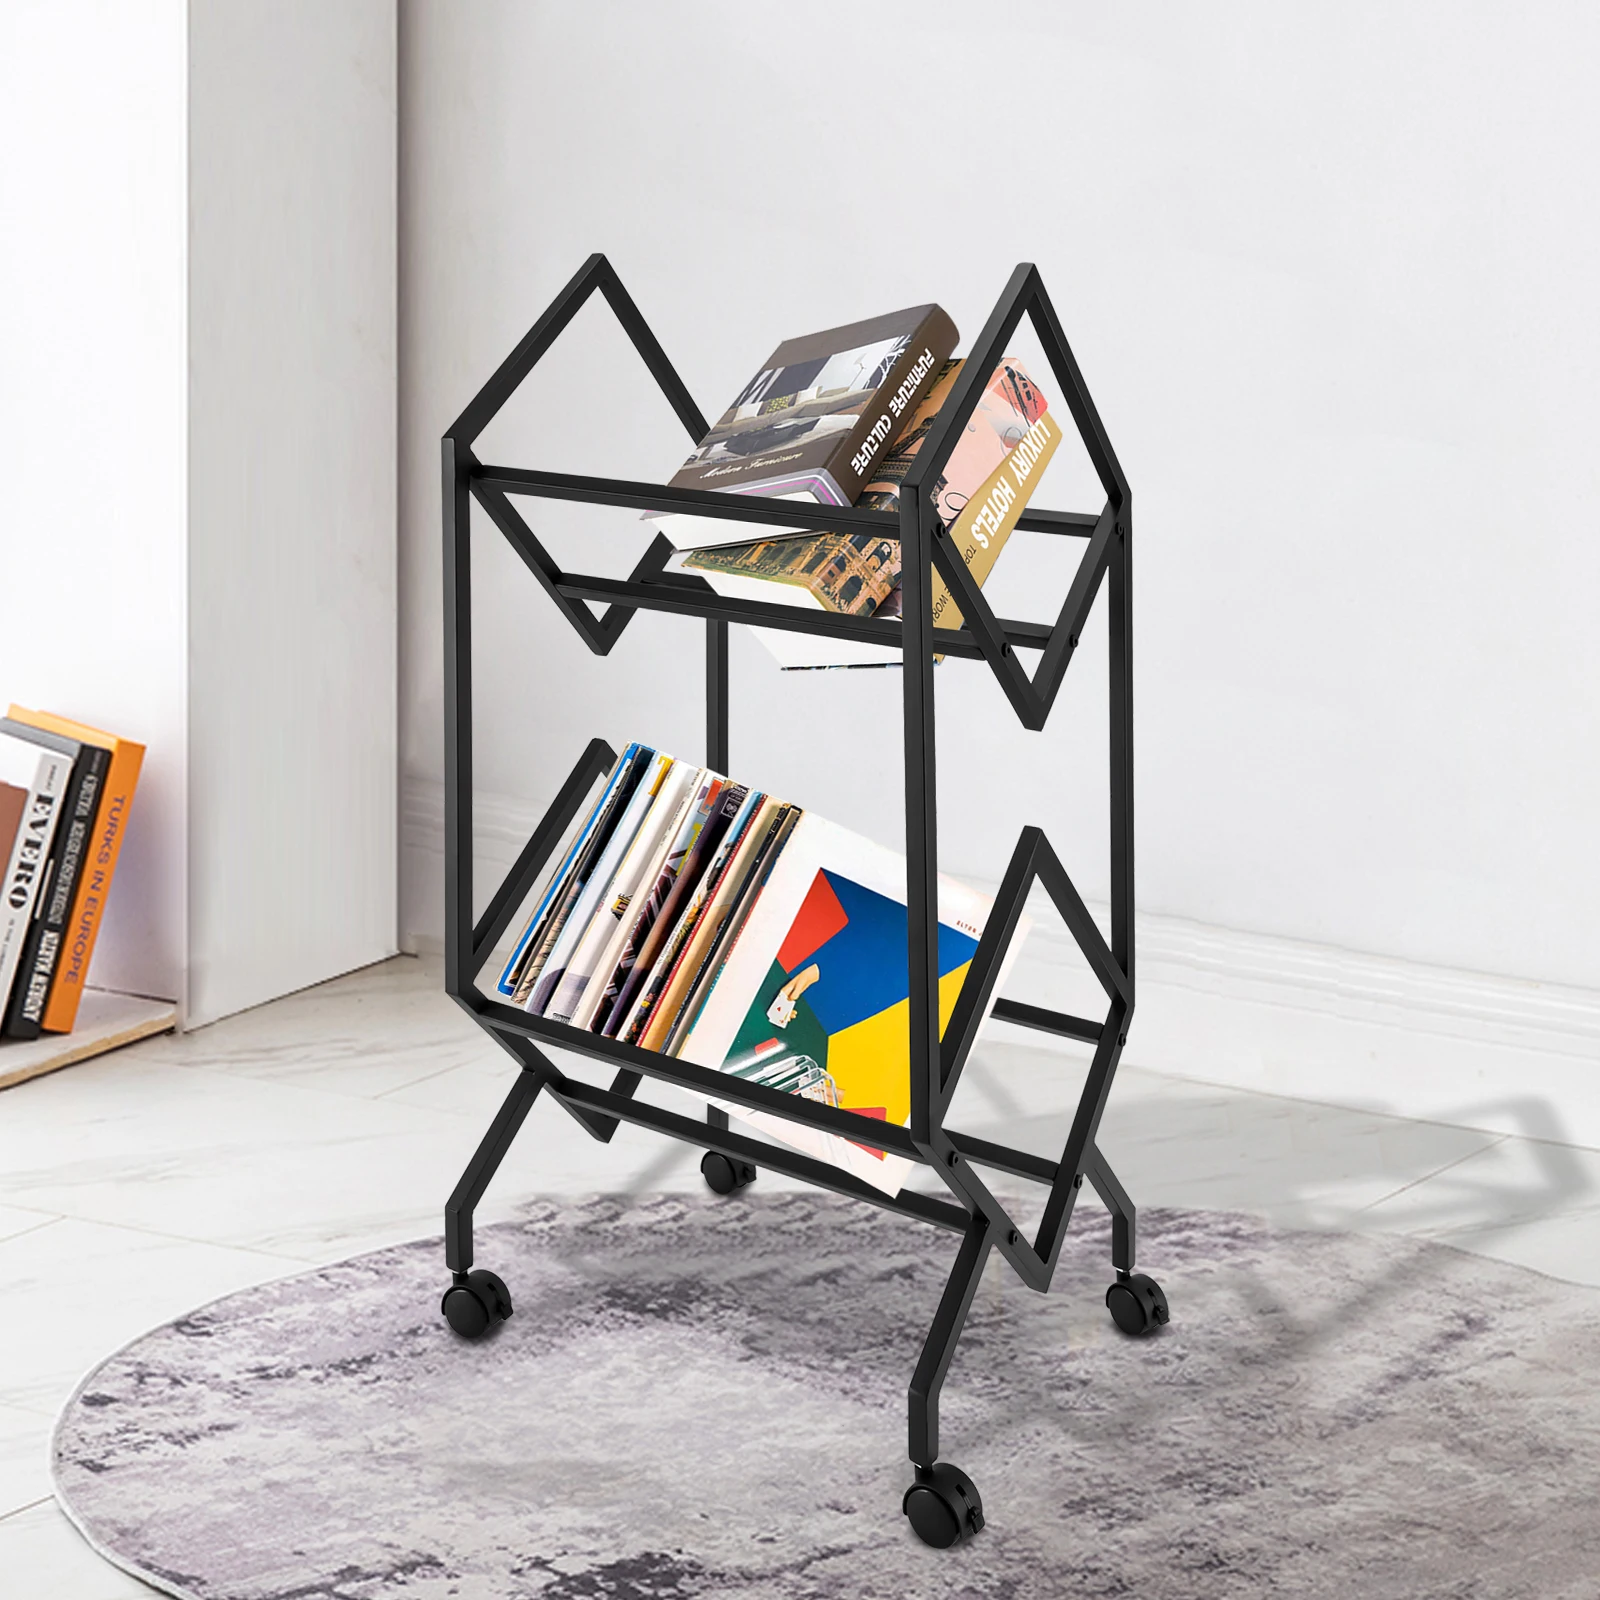 

Mobile Vinyl Record Storage, 2-Tier Record Holder, with Casters Metal Record Stand for Display Albums, Magazines etc. Black